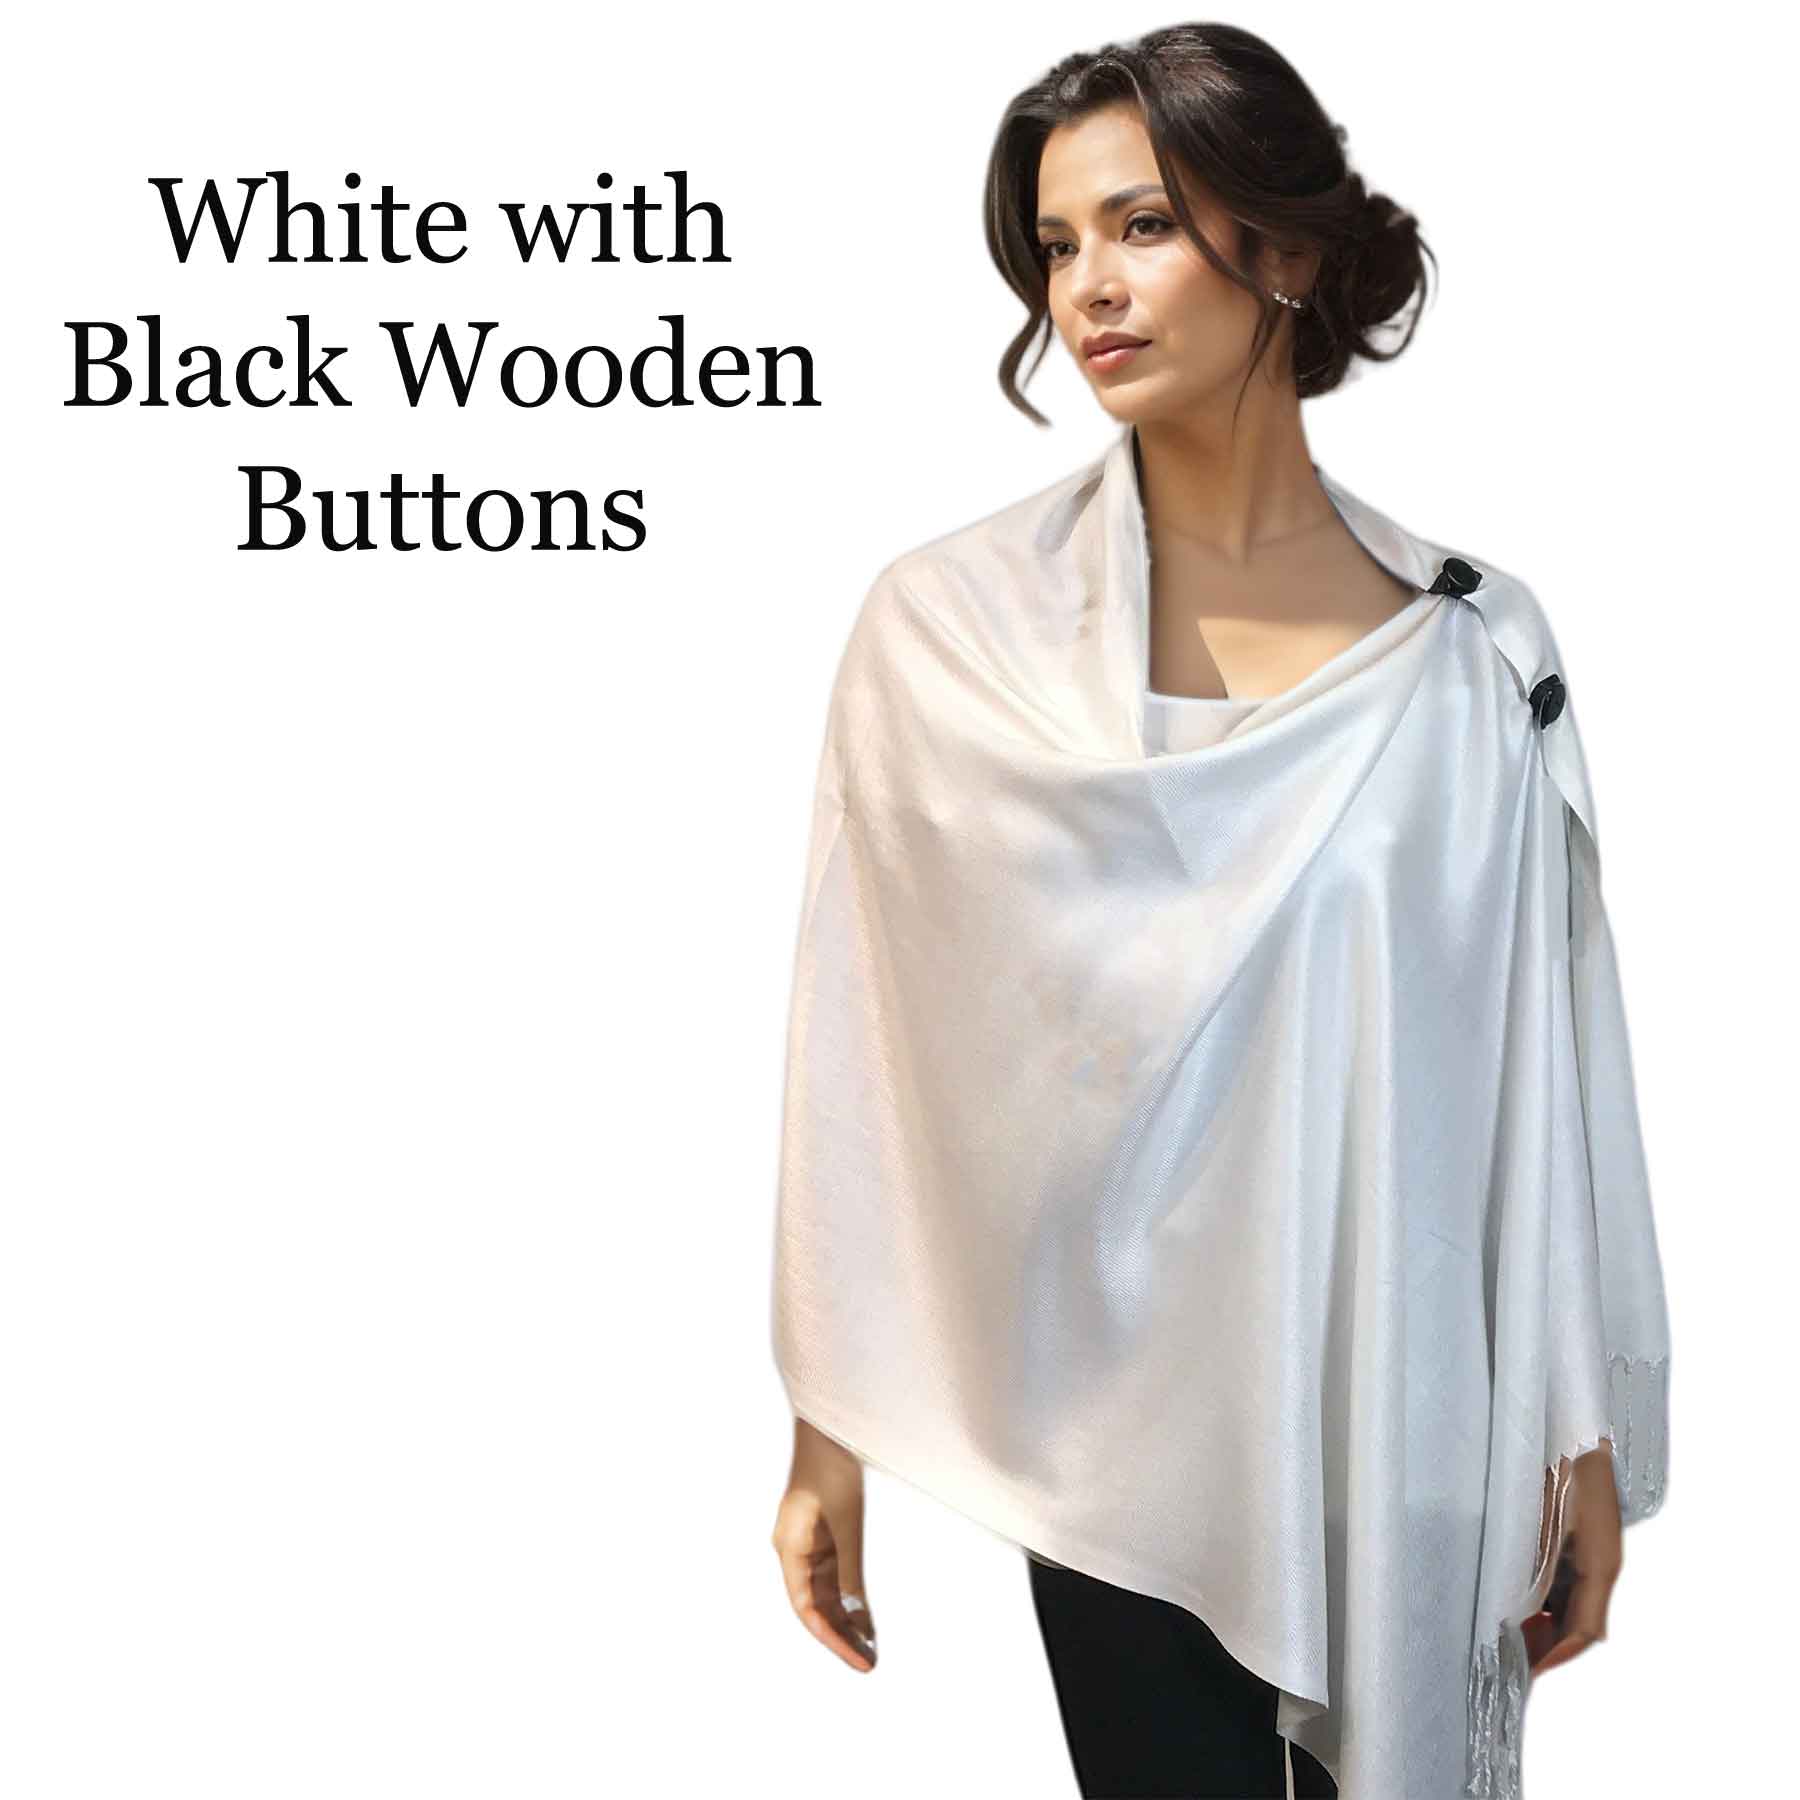 Solid White<br>
Pashmina Style Button Shawl